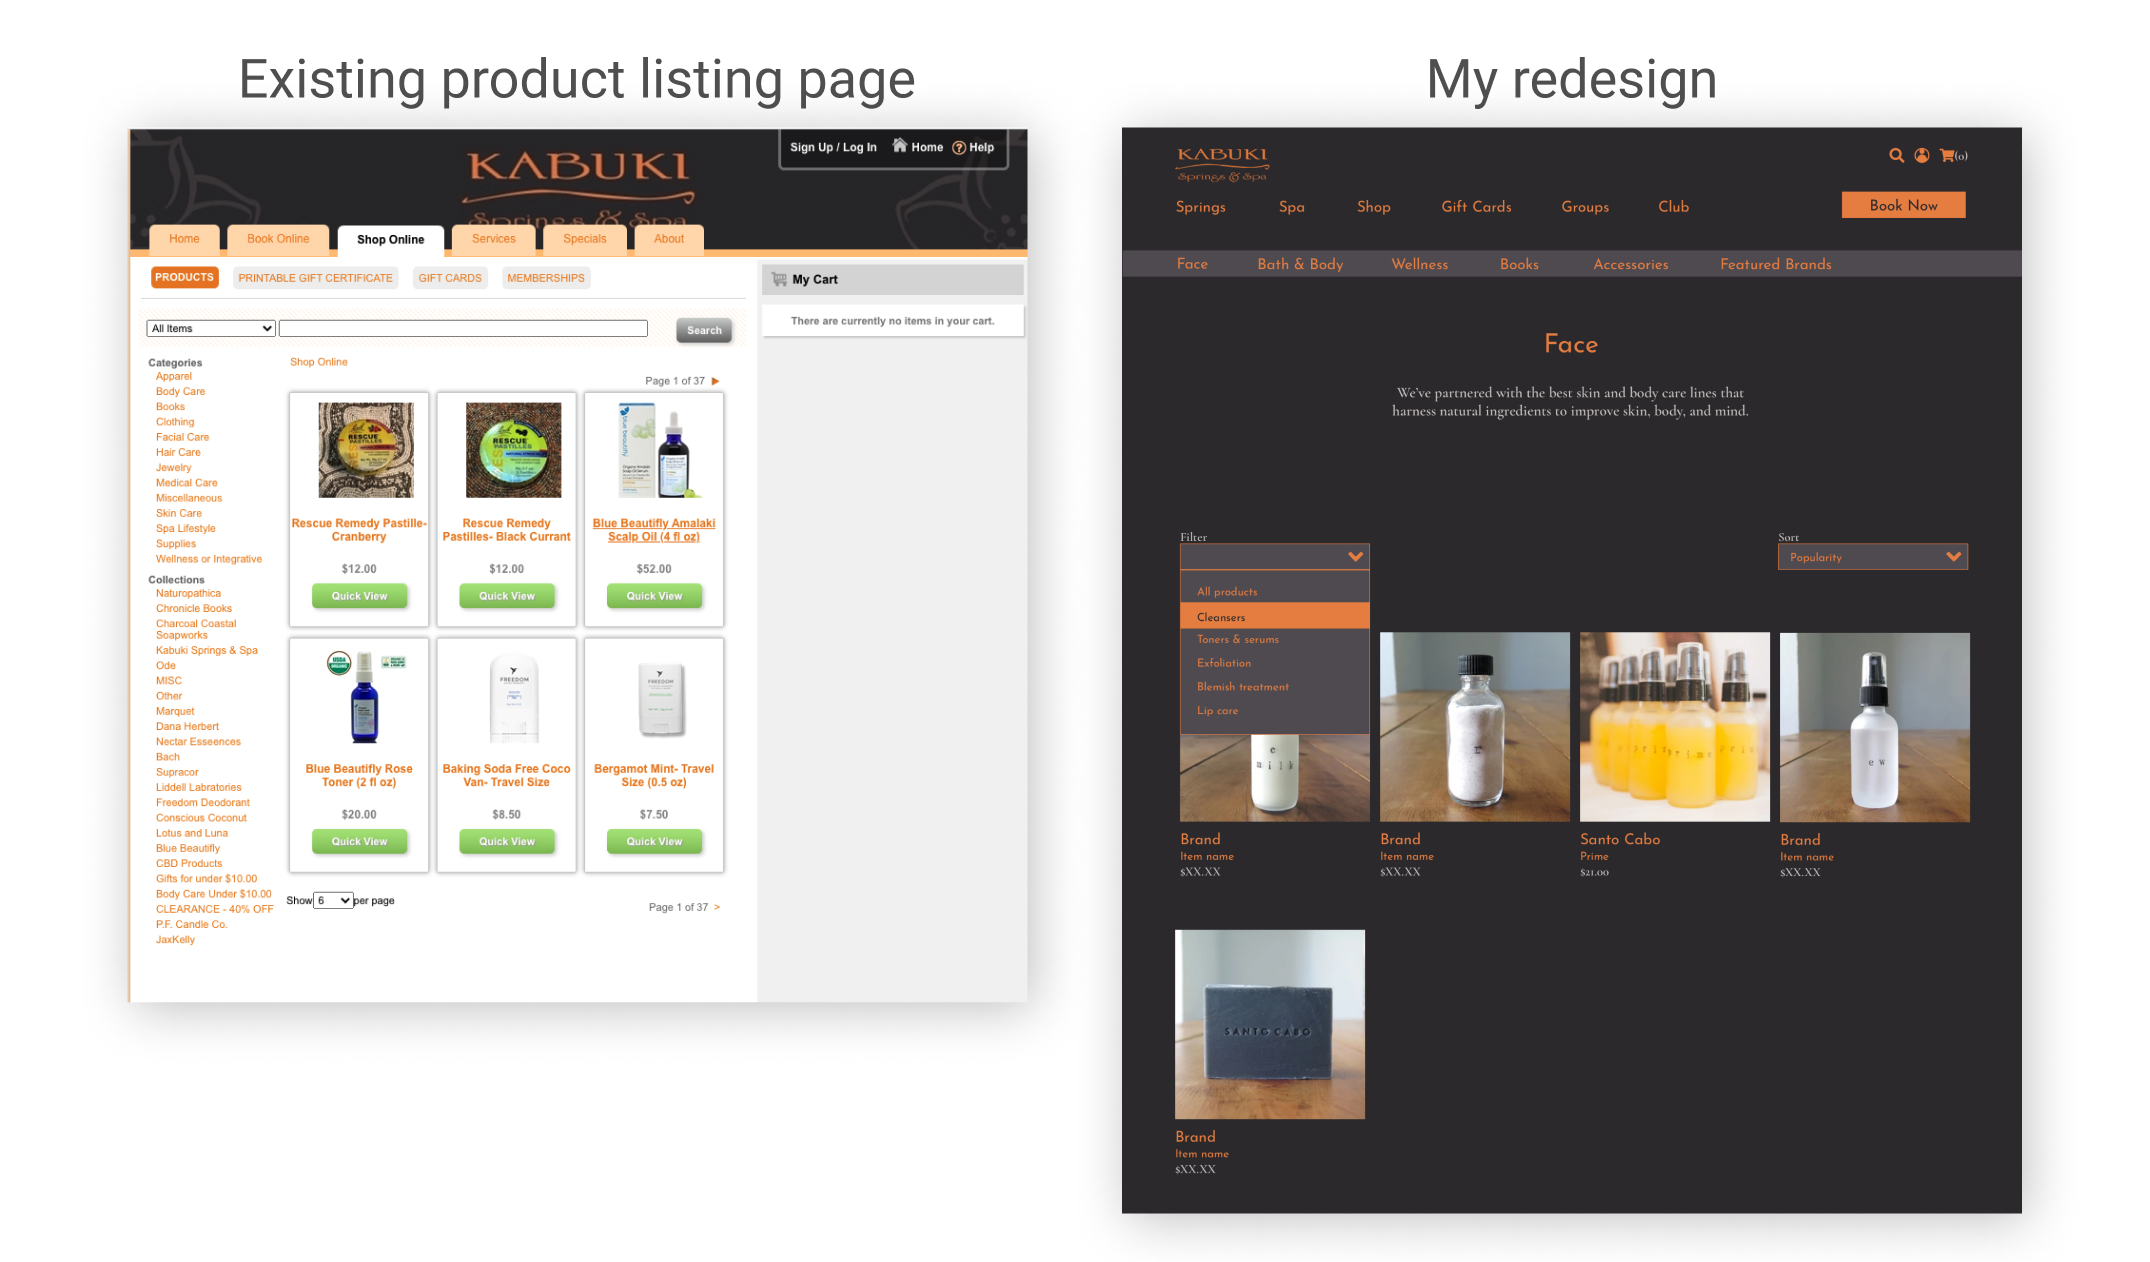 side by side comparison of the existing product listing page and my redesign